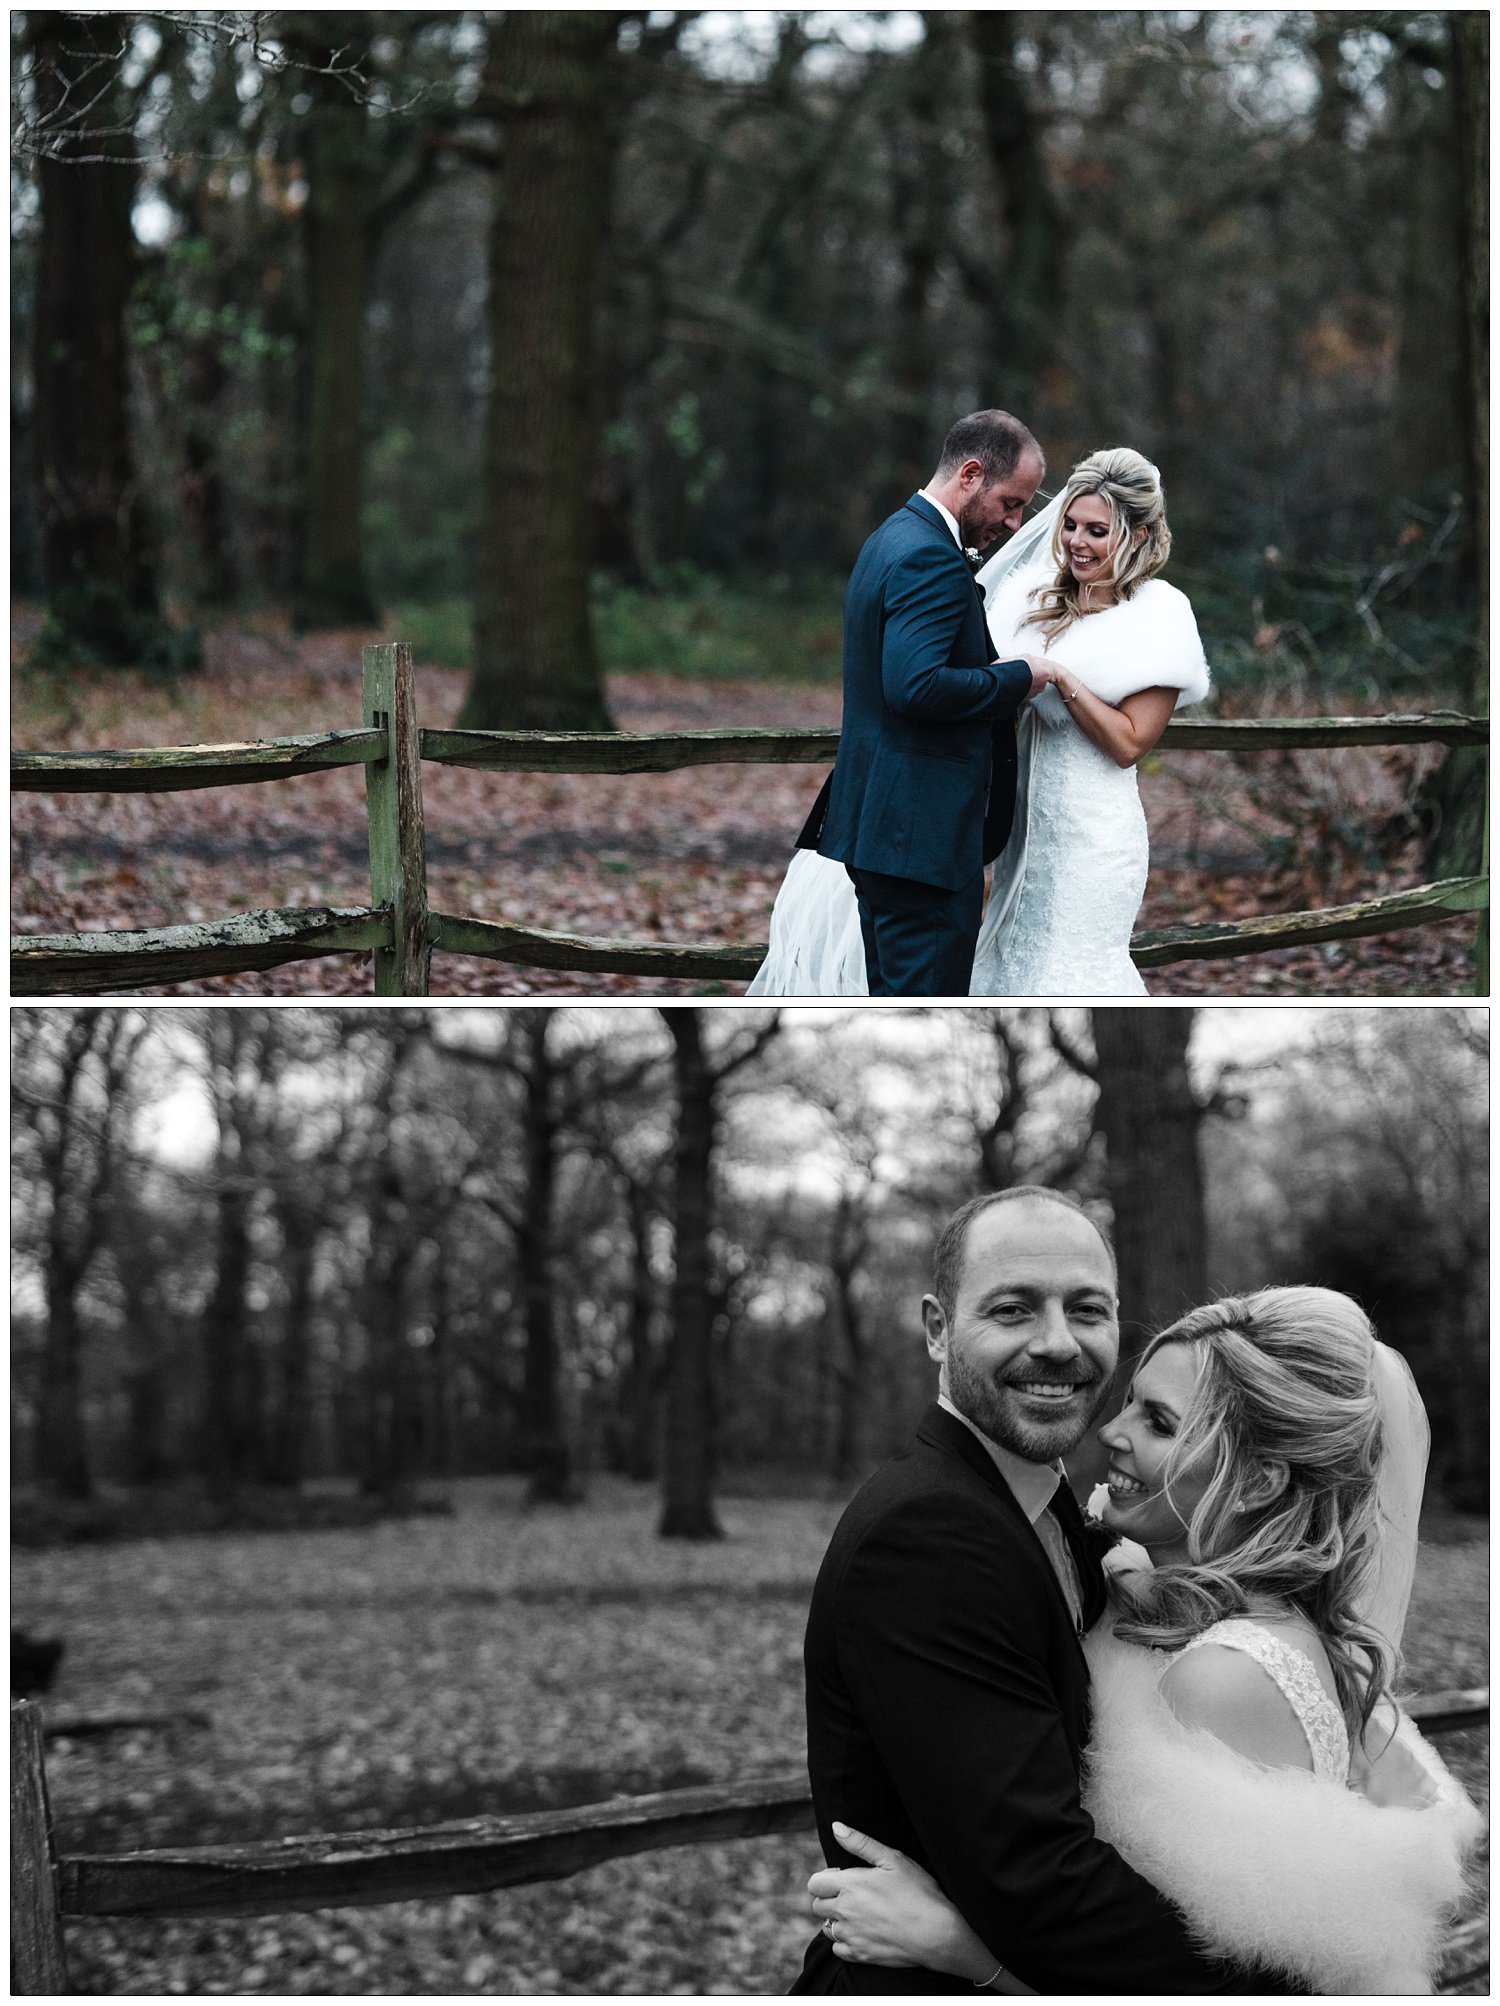 Newly married couple photographs in Hockley woods in December. It's already starting to get dark.